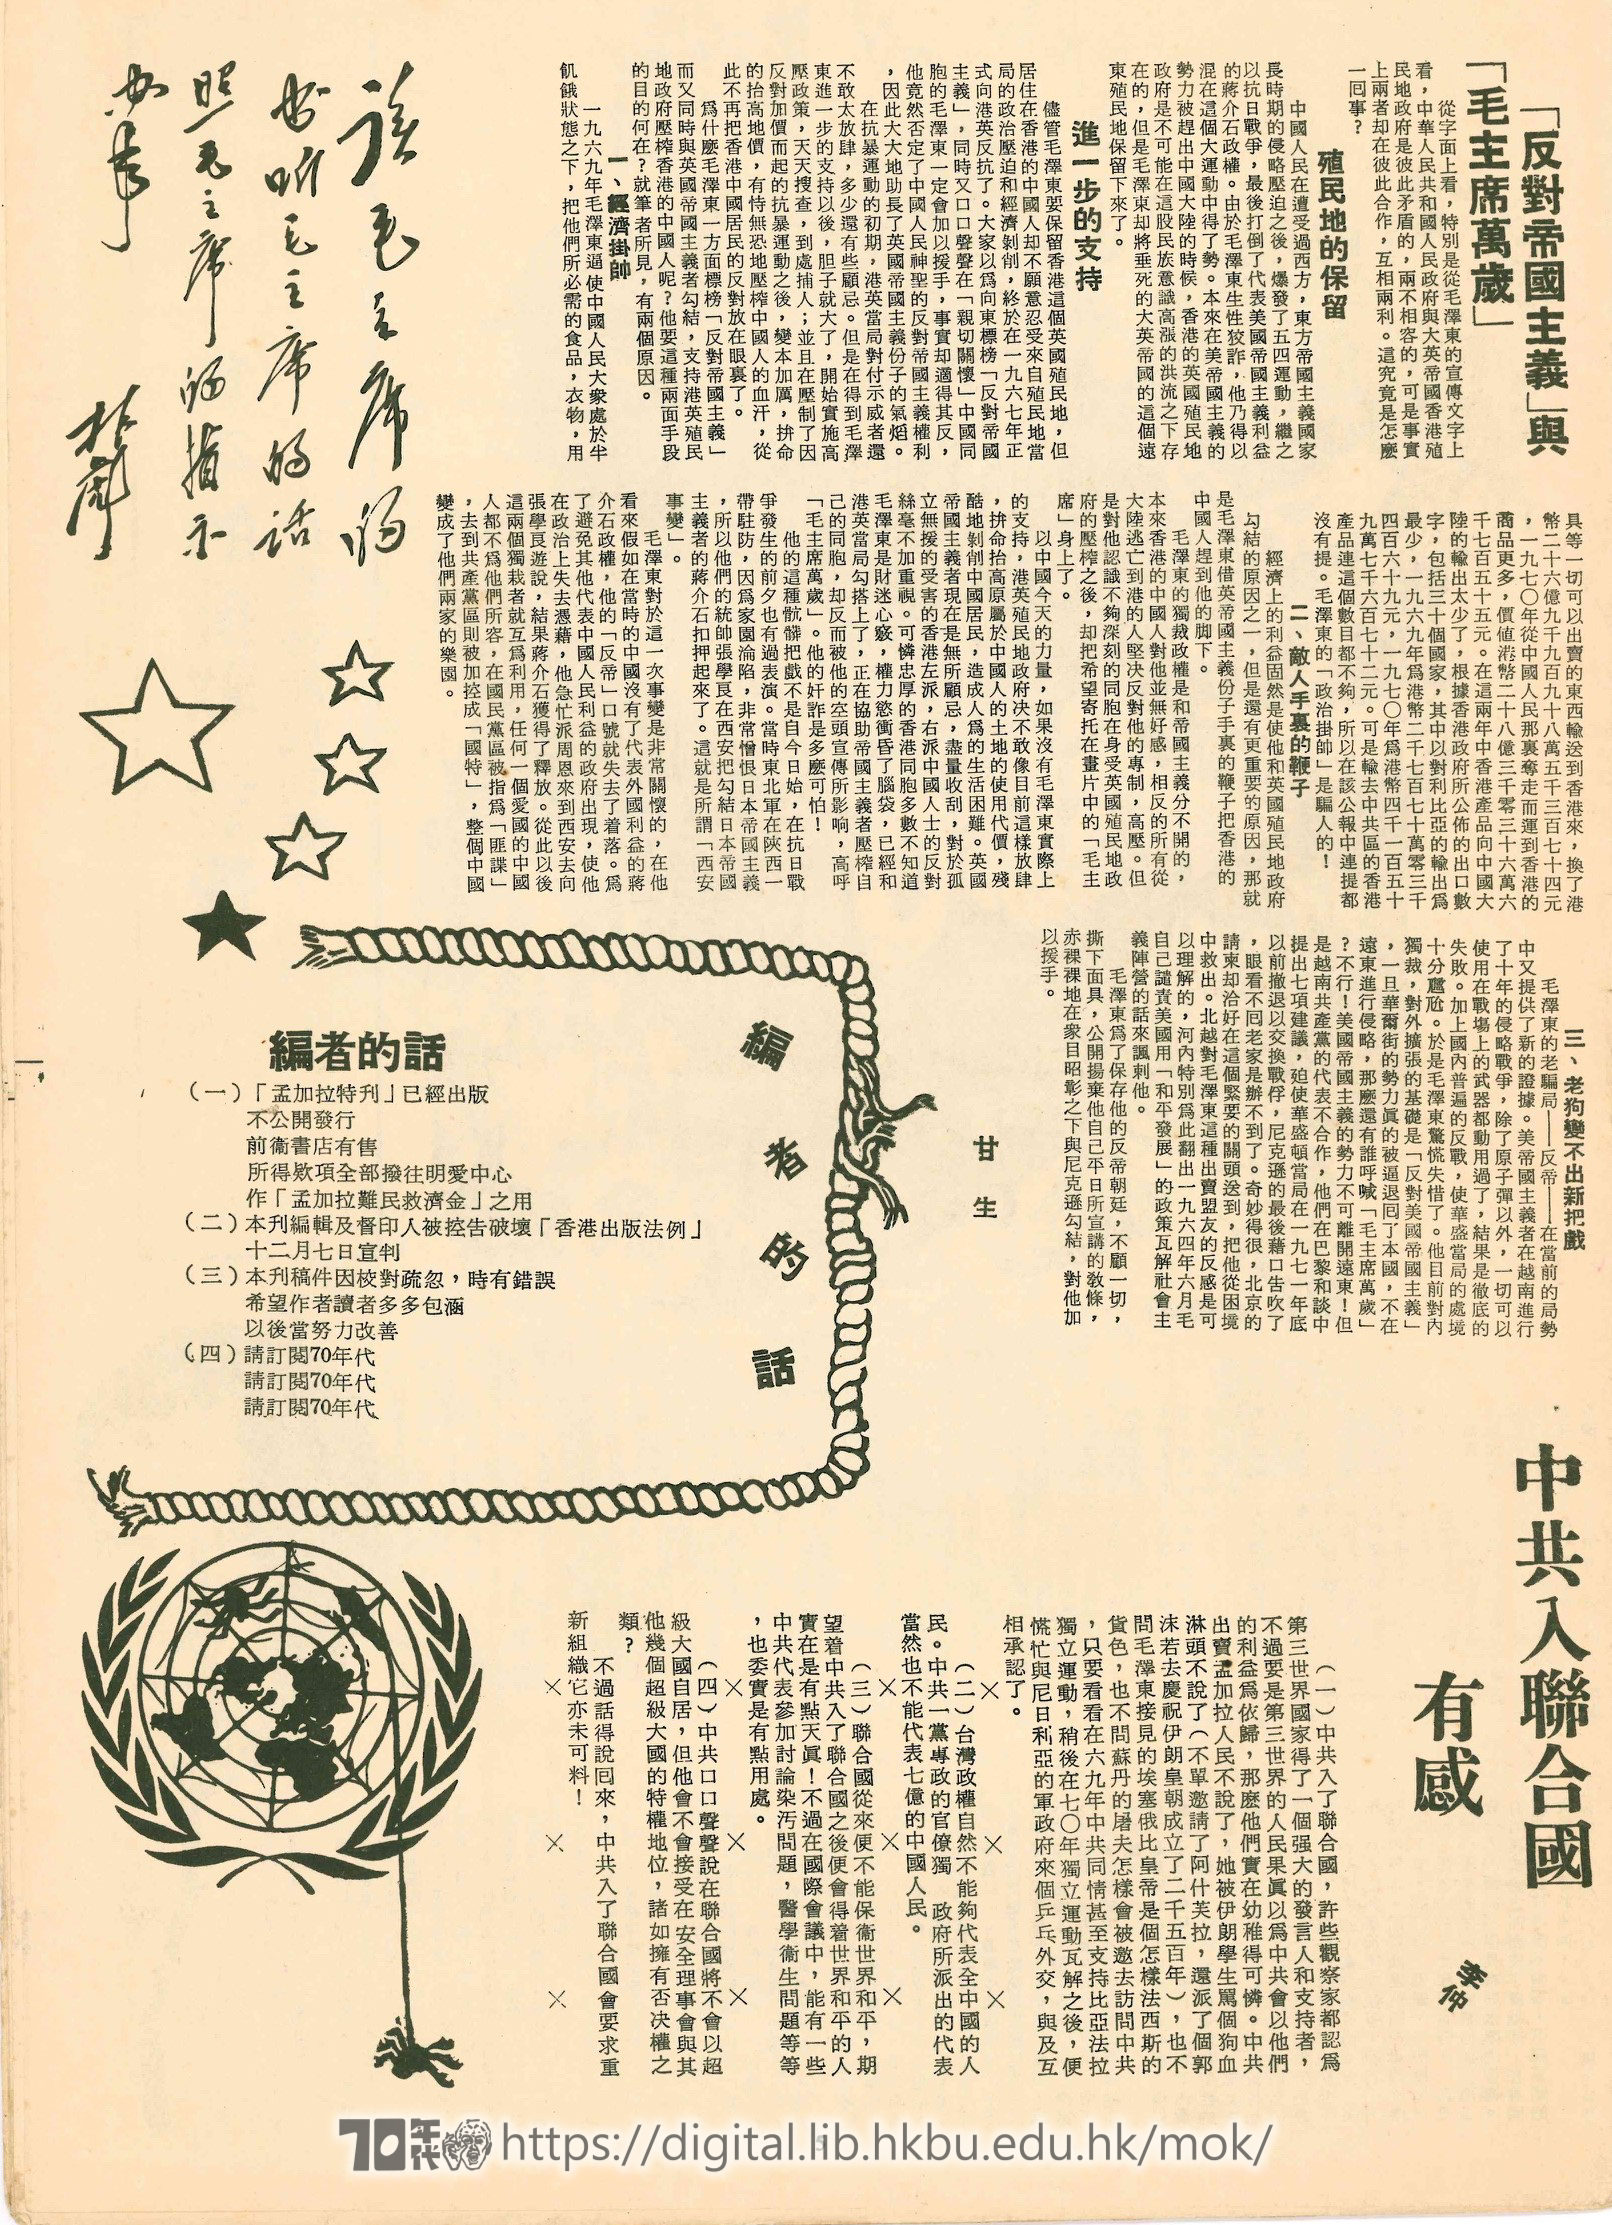  25 Anti-imperialism and long live Chairman Mao 甘生 